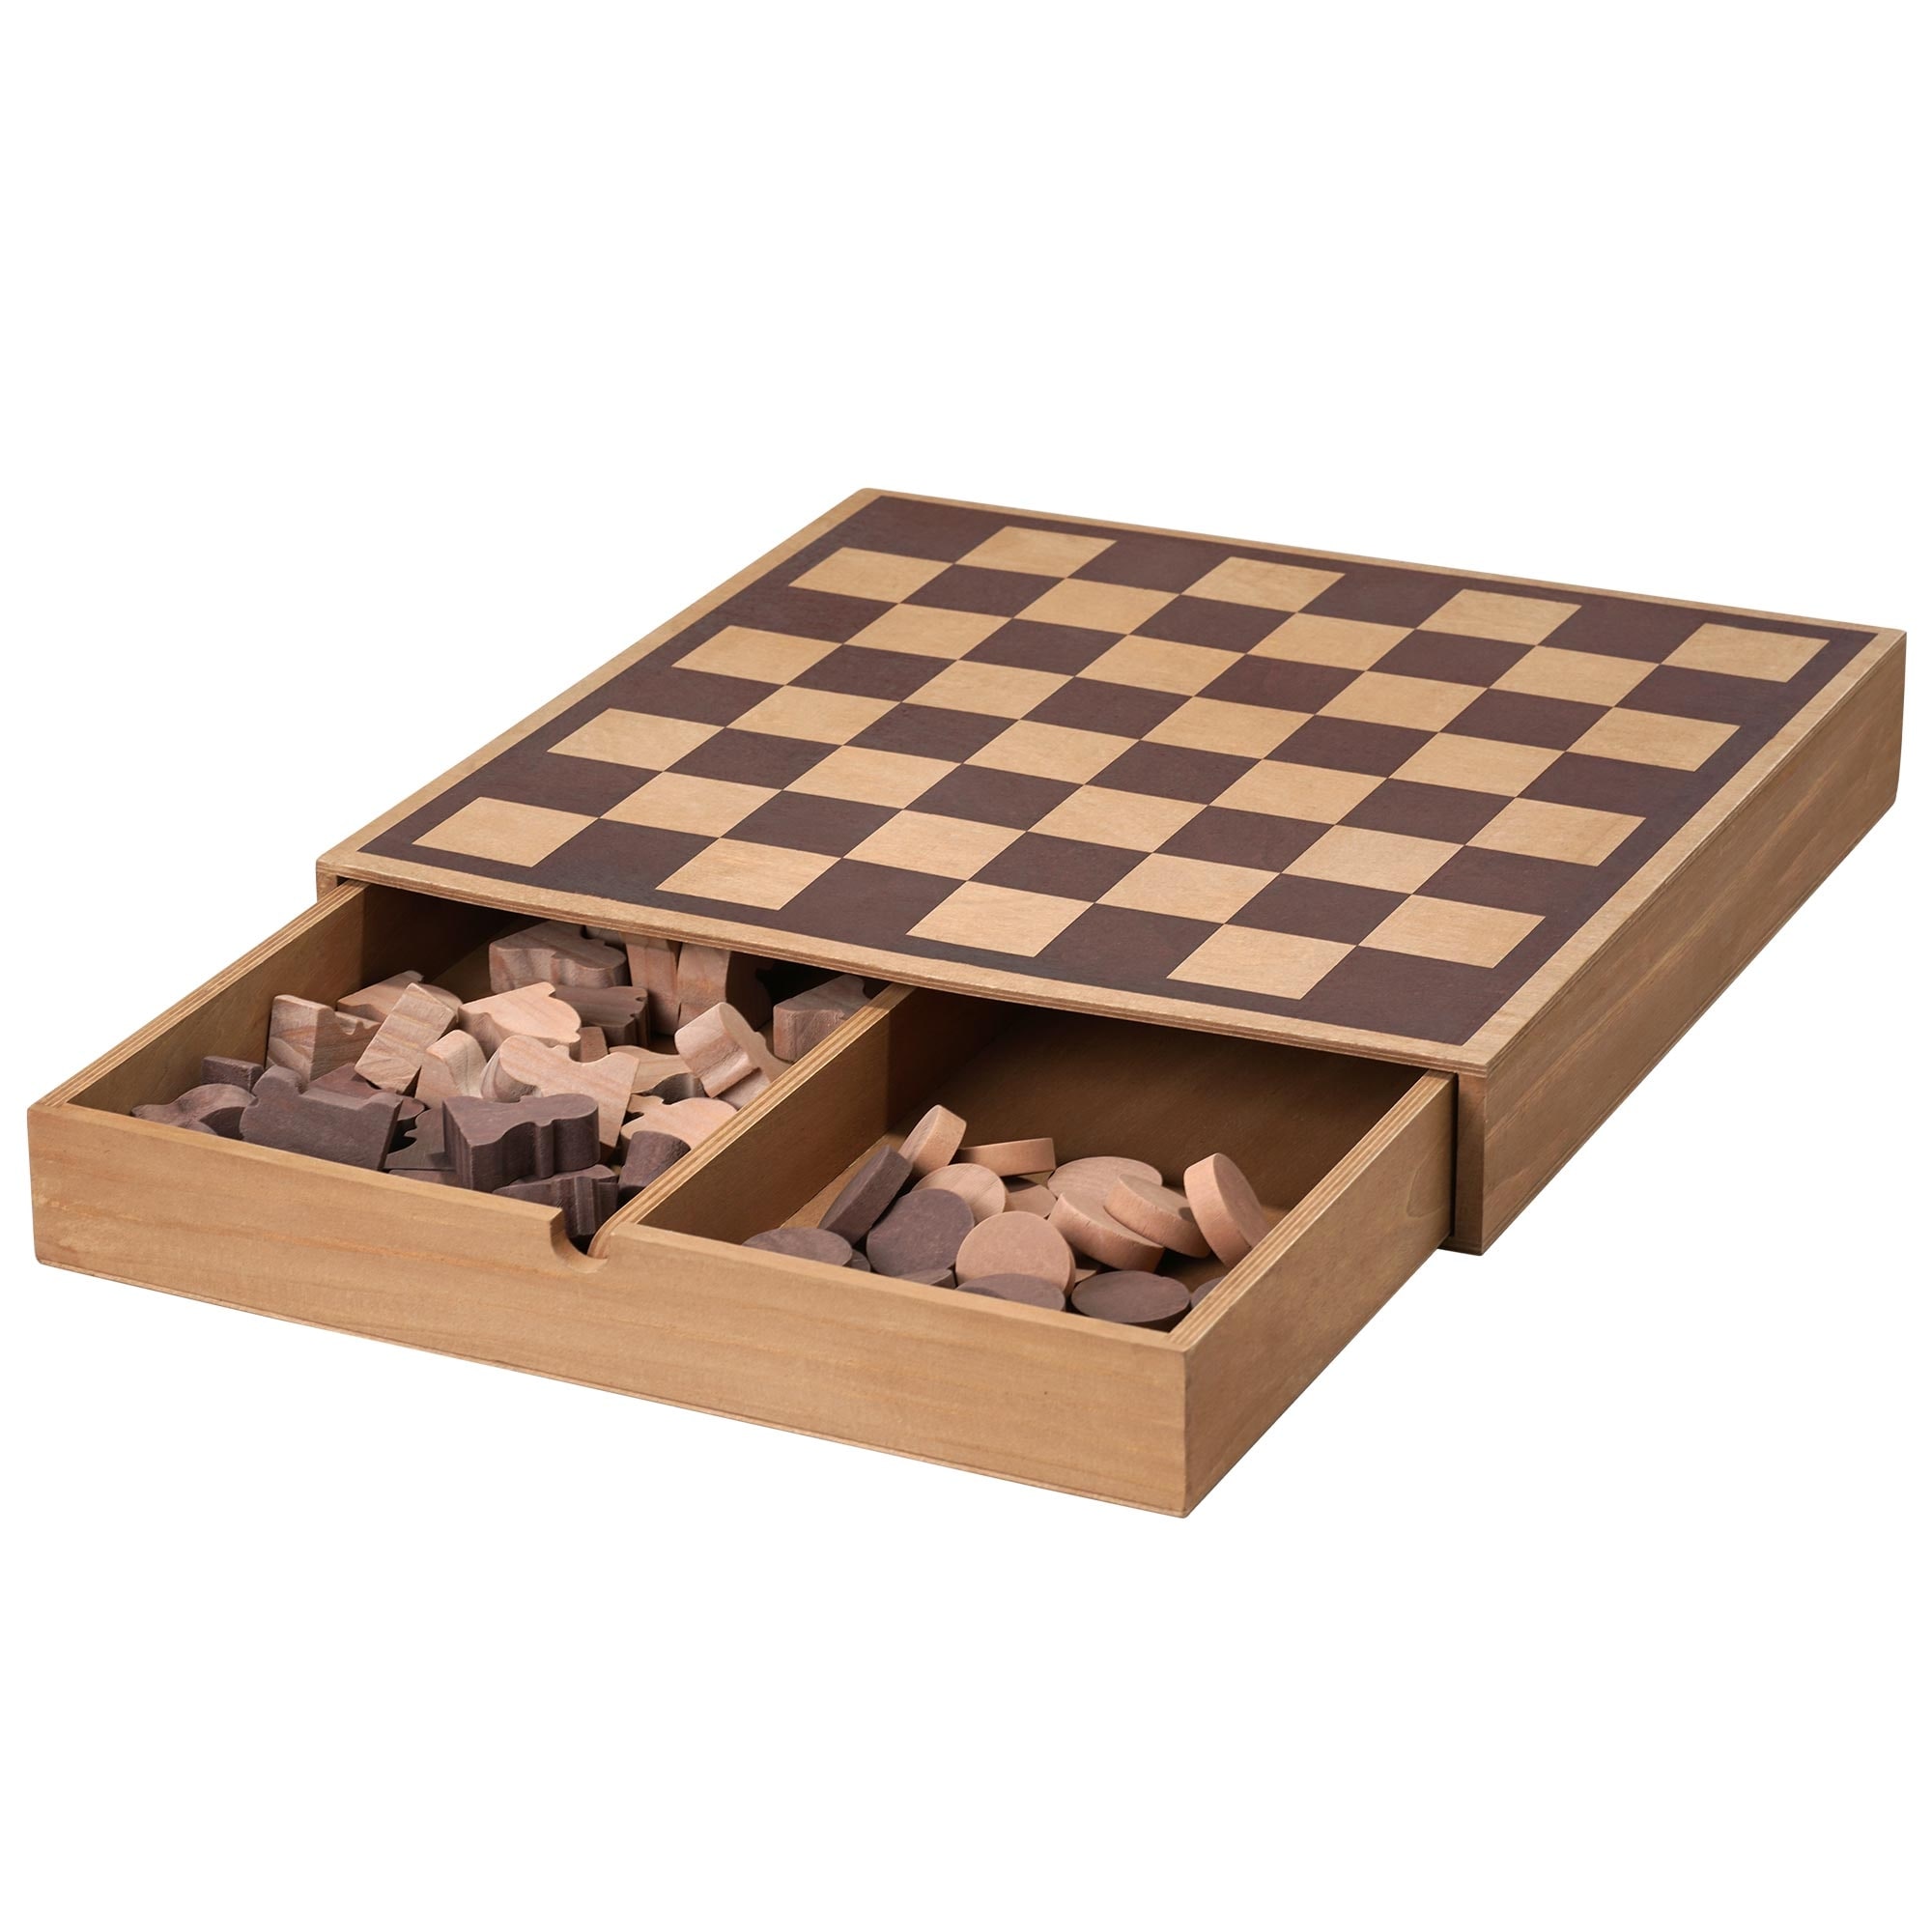 American Art Decor Wood Chess & Checkers Board Game Set with Drawer Tabletop Decor - 2.5" H x 16" L x 16" D